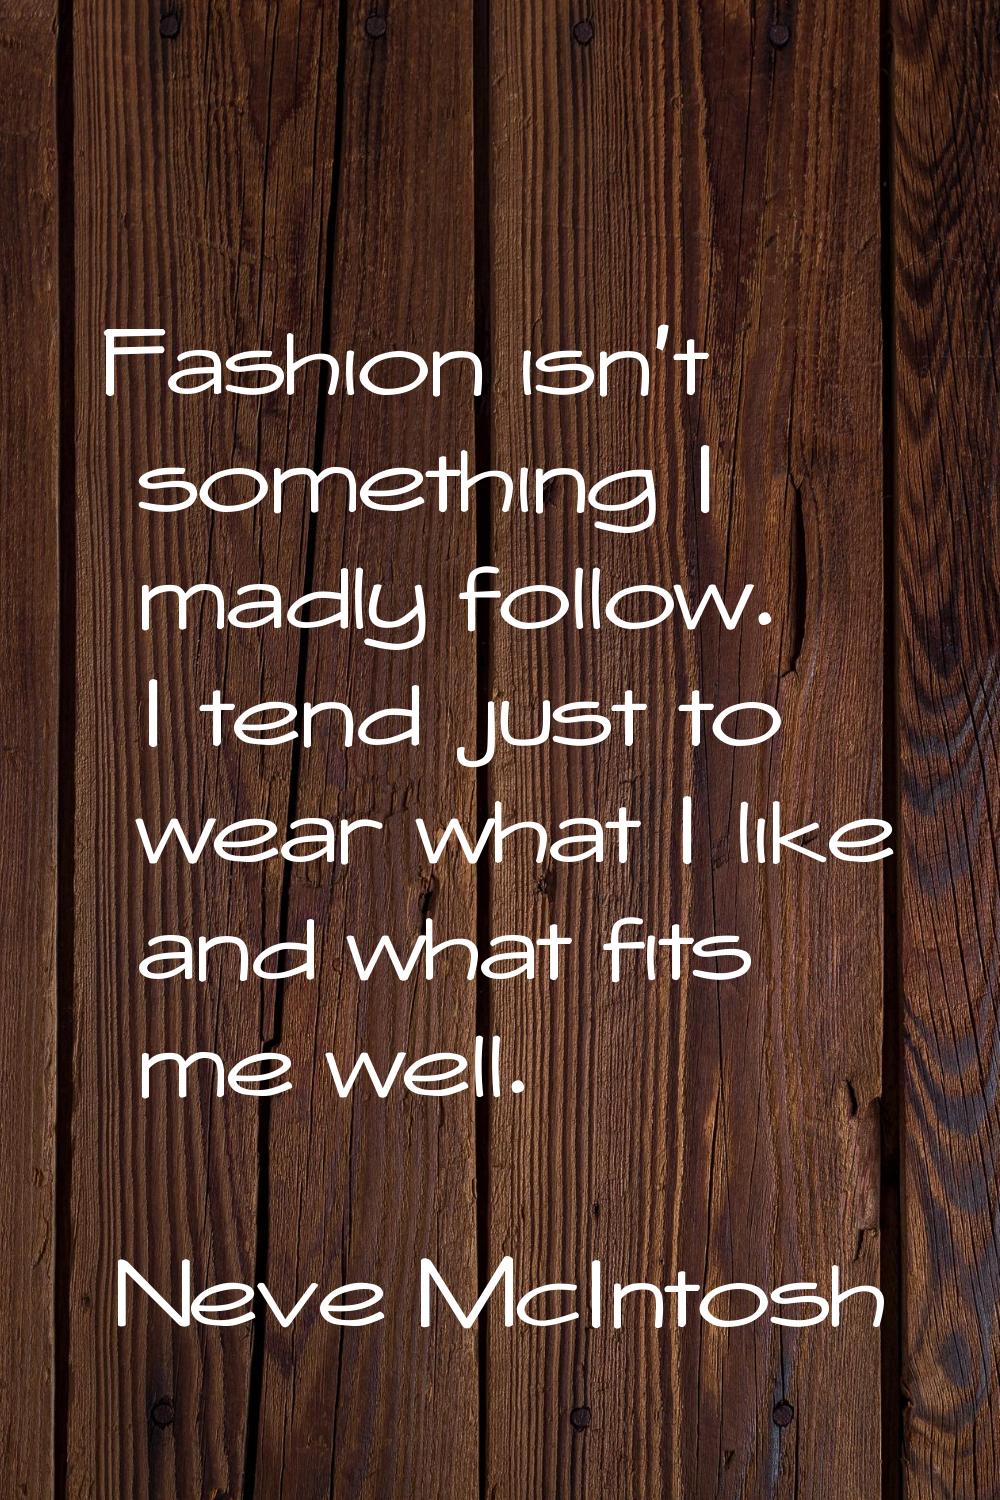 Fashion isn't something I madly follow. I tend just to wear what I like and what fits me well.